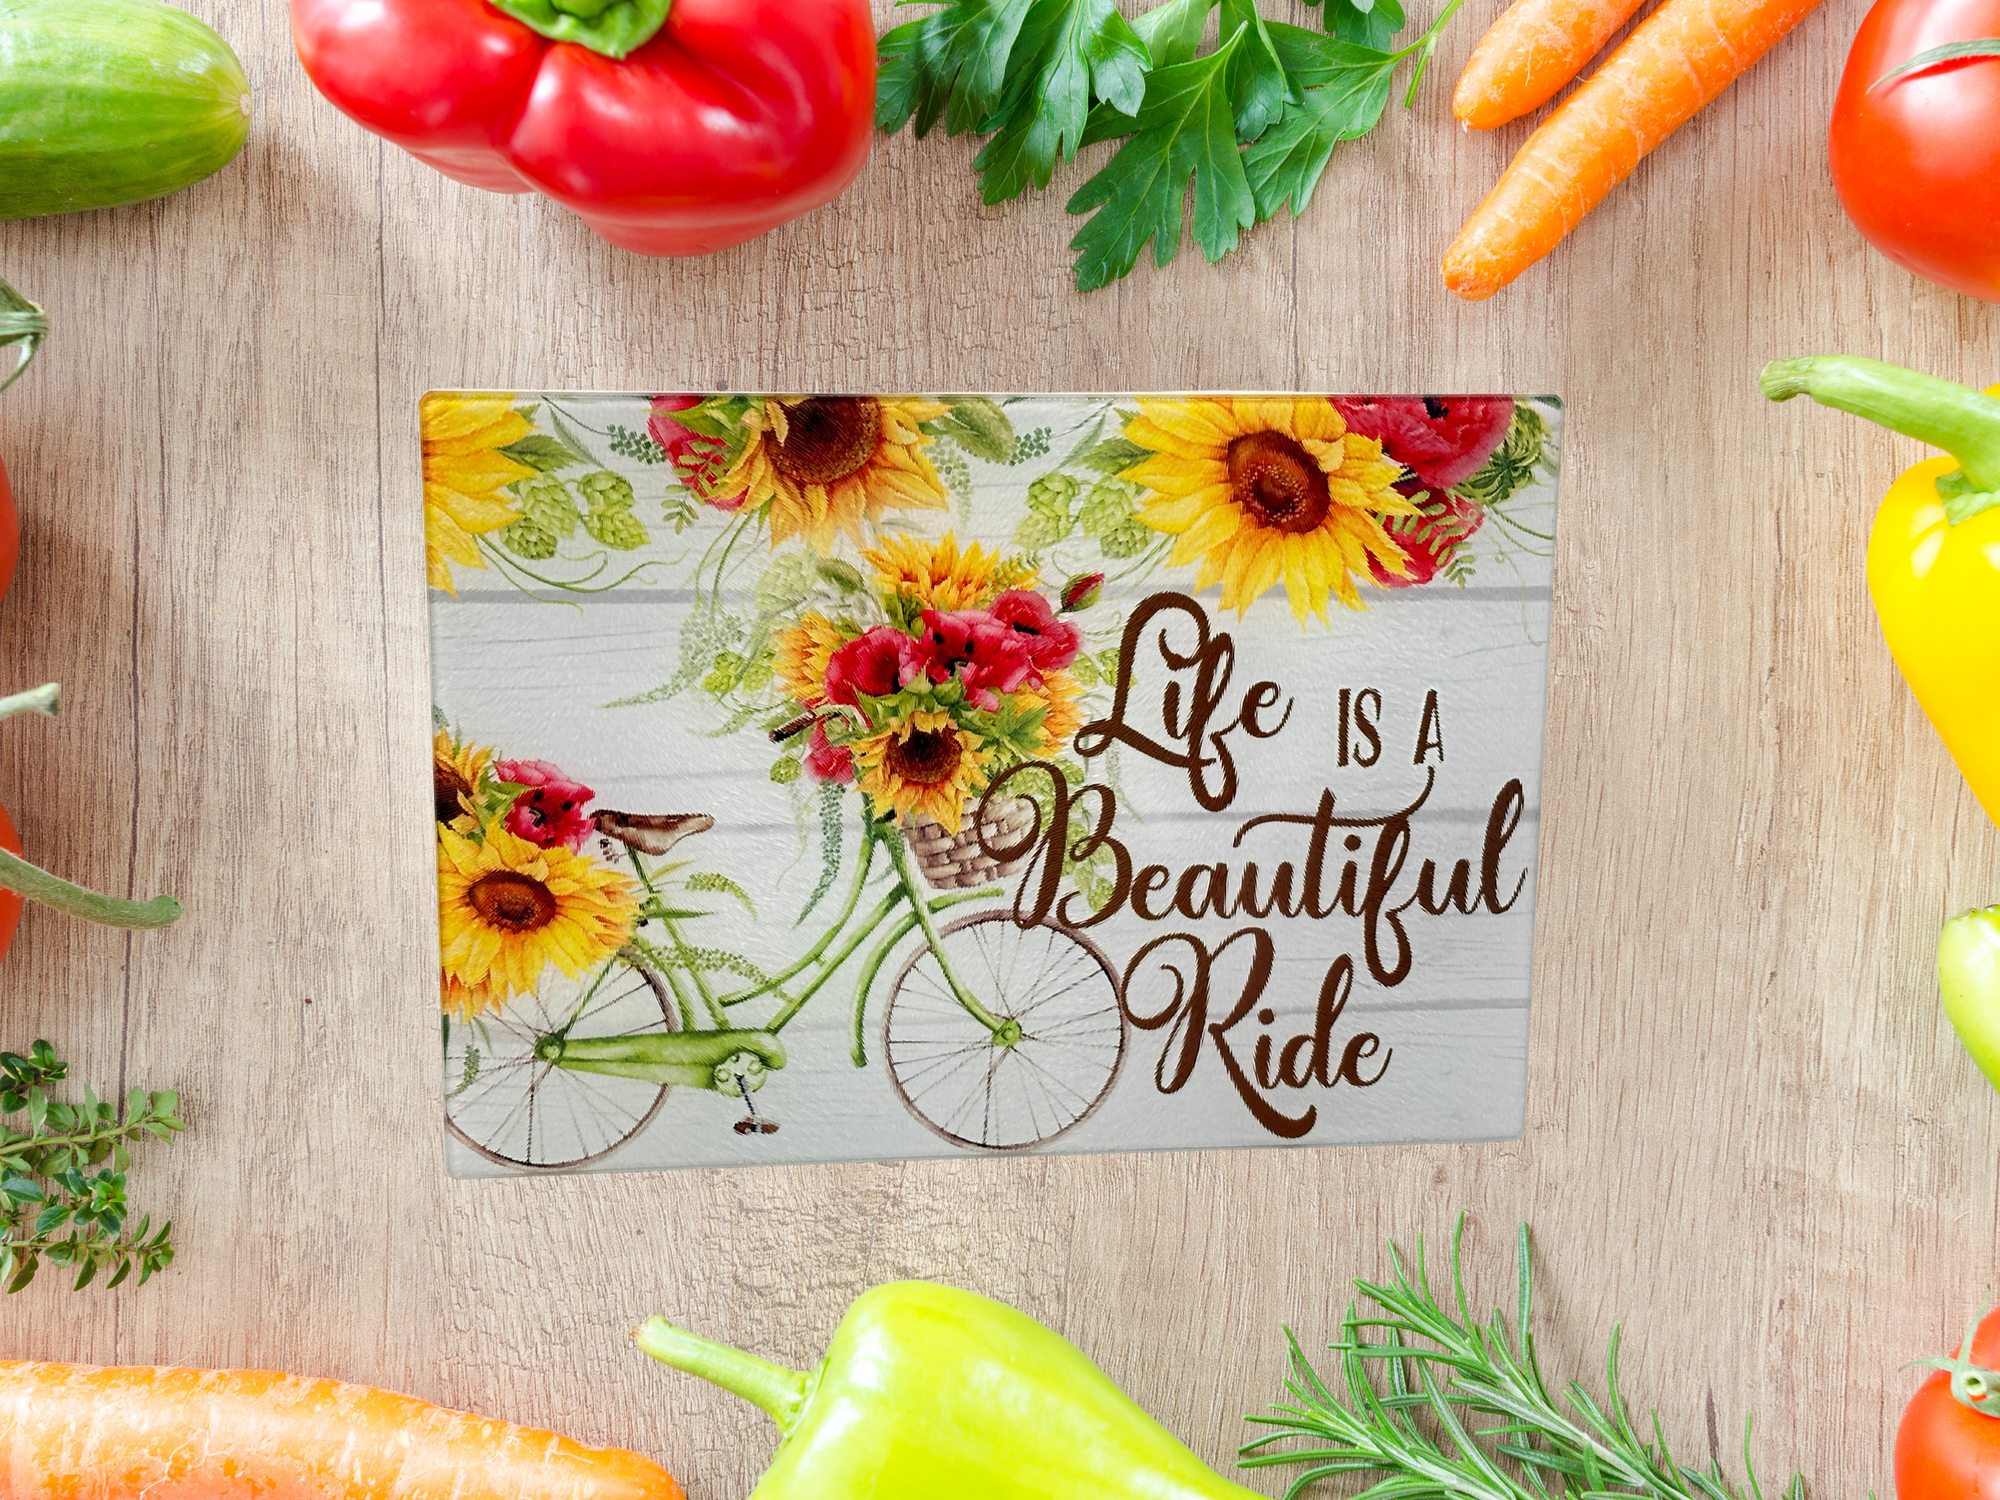 Personalized 8" x 11" Textured & Tempered Glass Cutting Board/Life is a Beautiful Ride/Design/Space Saving Kitchen Accessory/#604